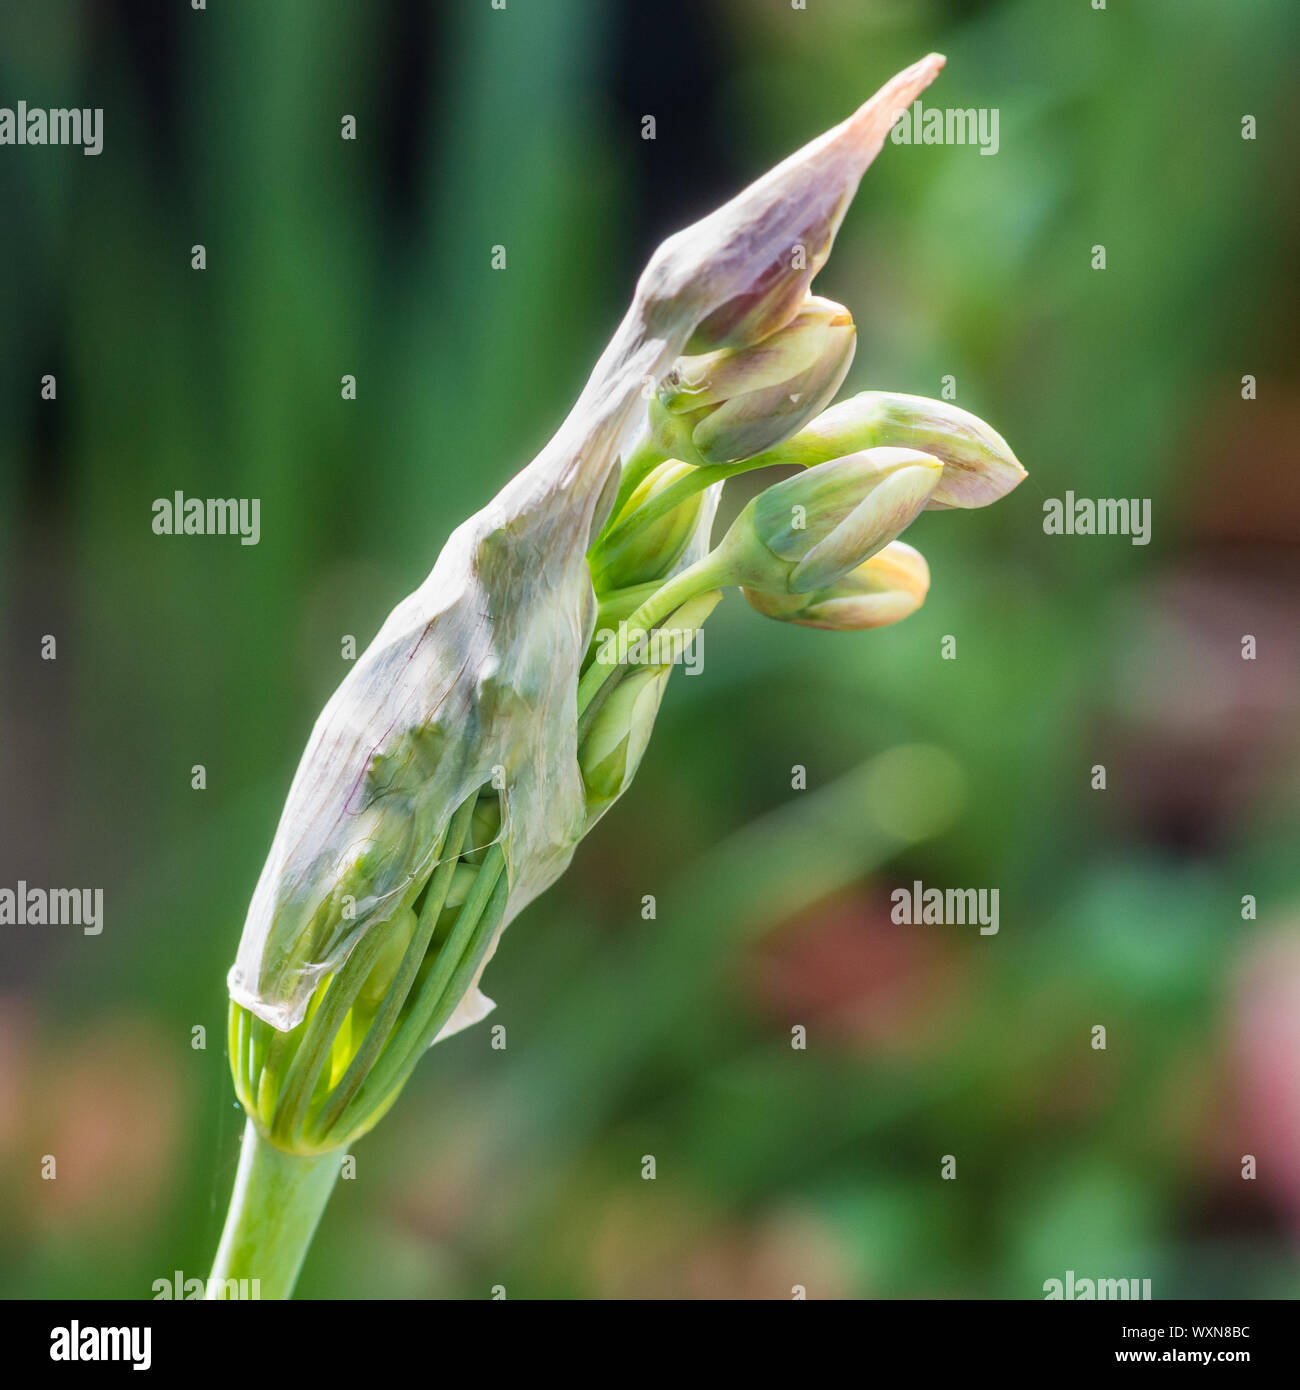 A macro shot of the flower buds of an allium siculum plant. Stock Photo